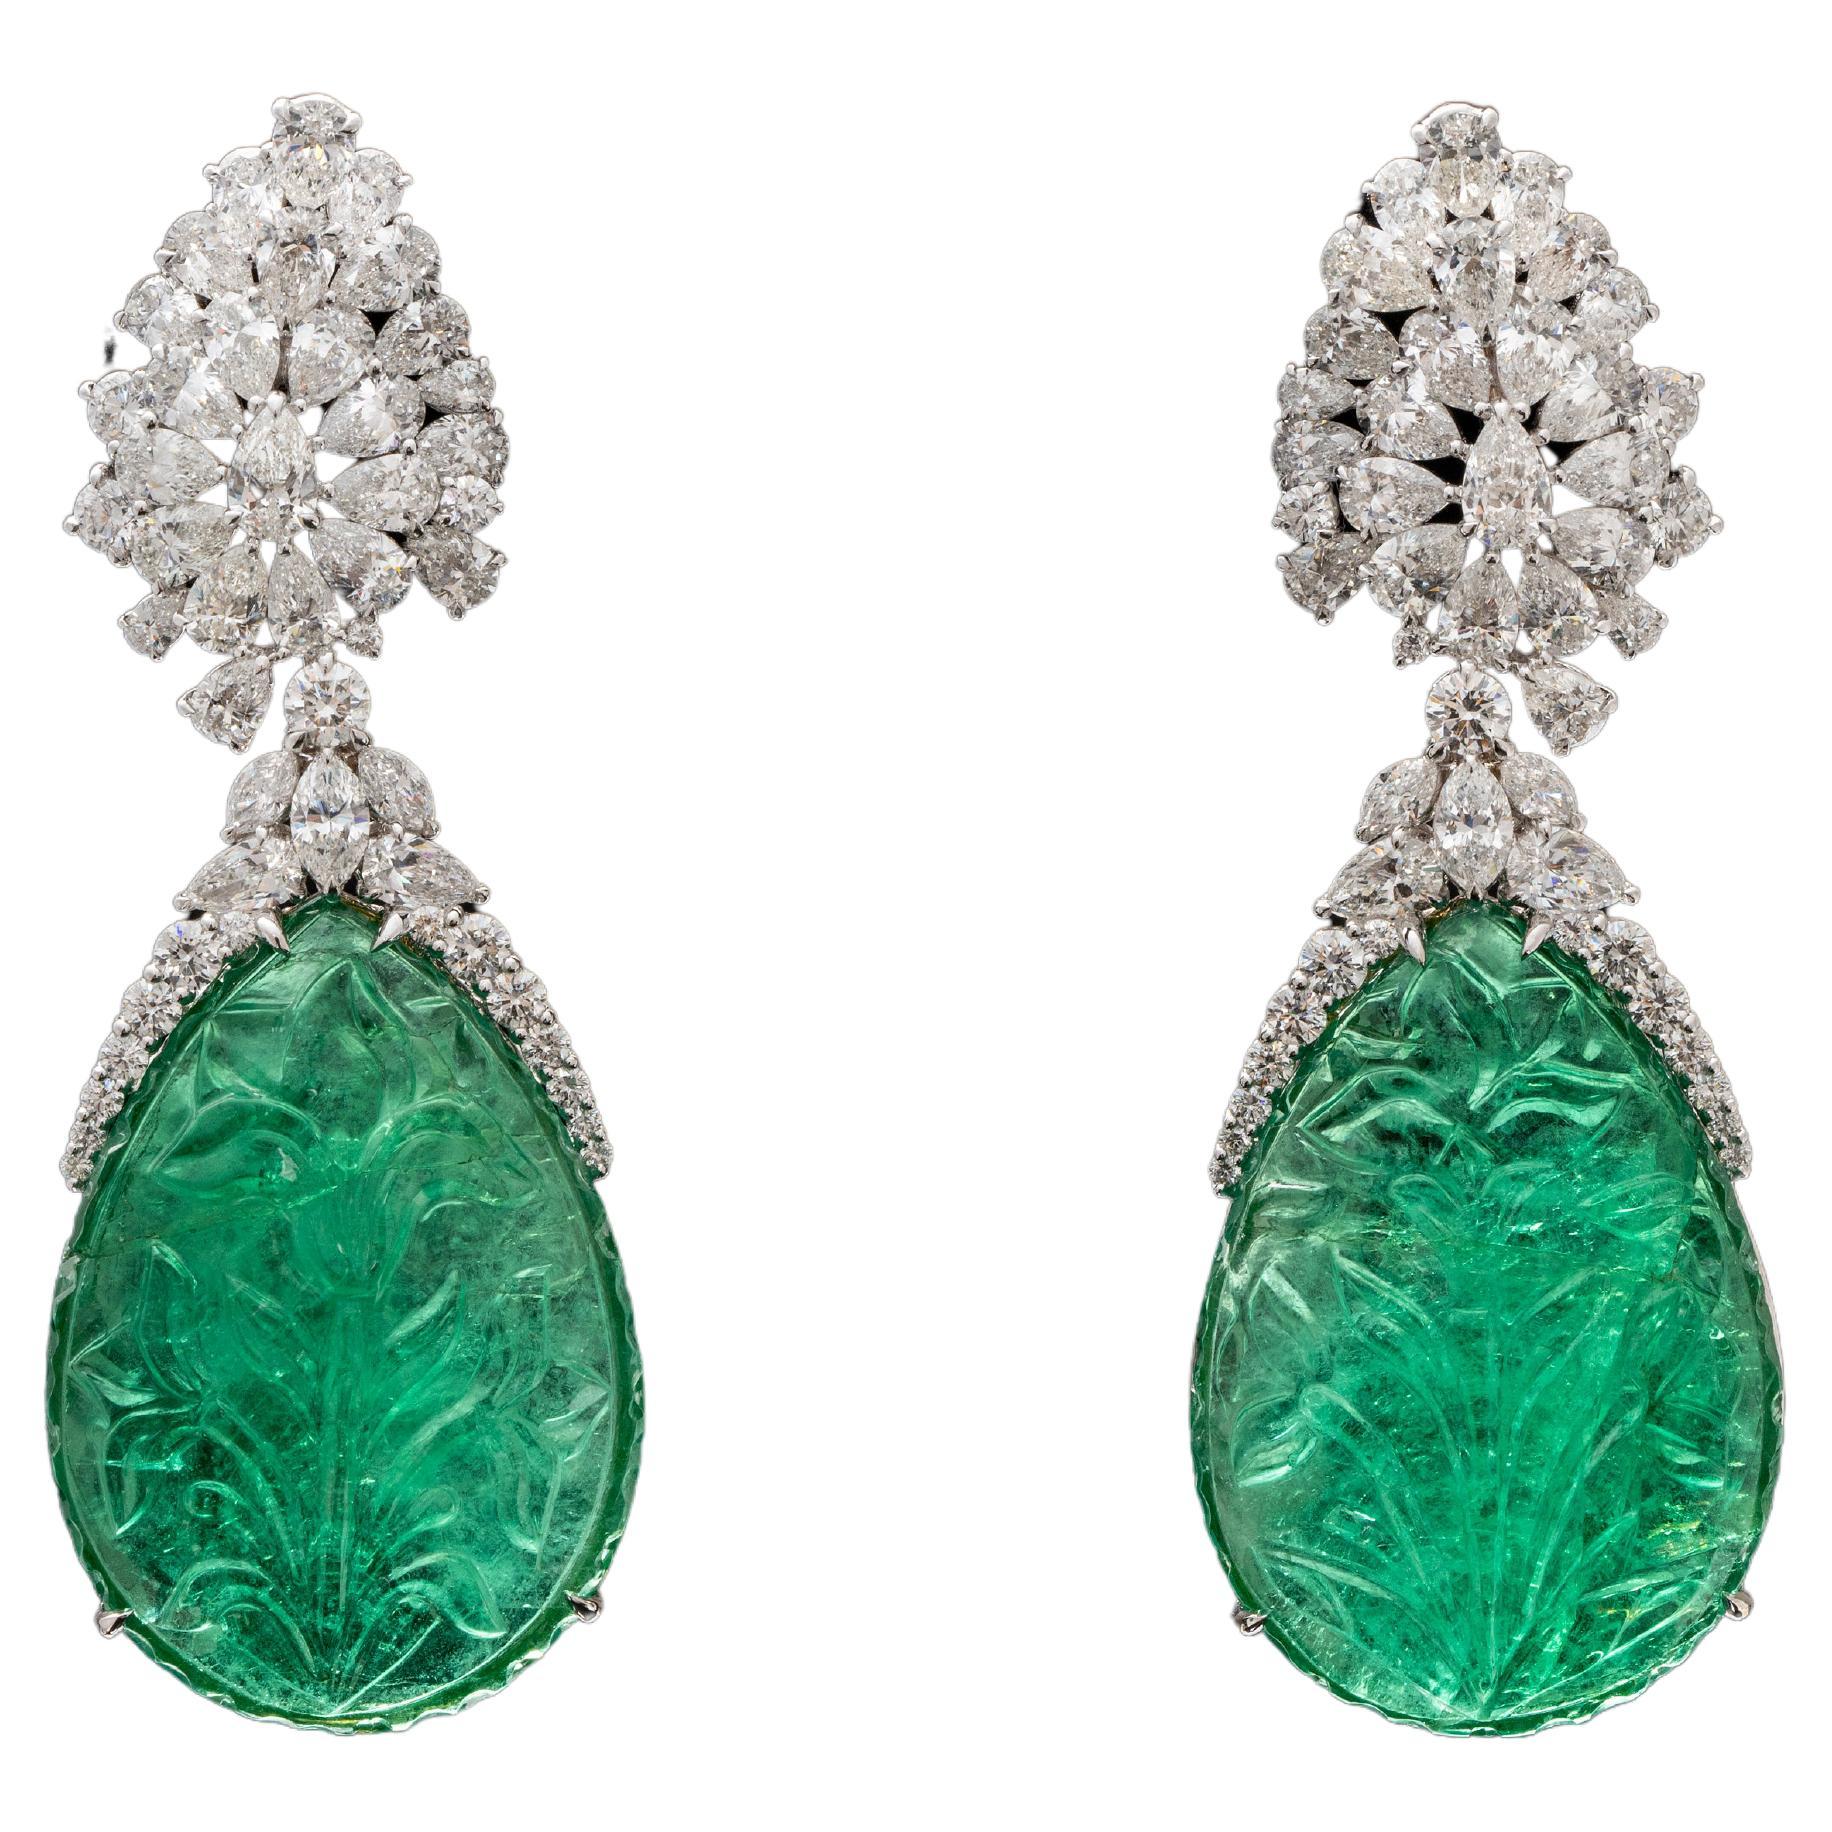 Engraved Carving of 58.34cts and 53.94cts Antique Emerald Earring For Sale